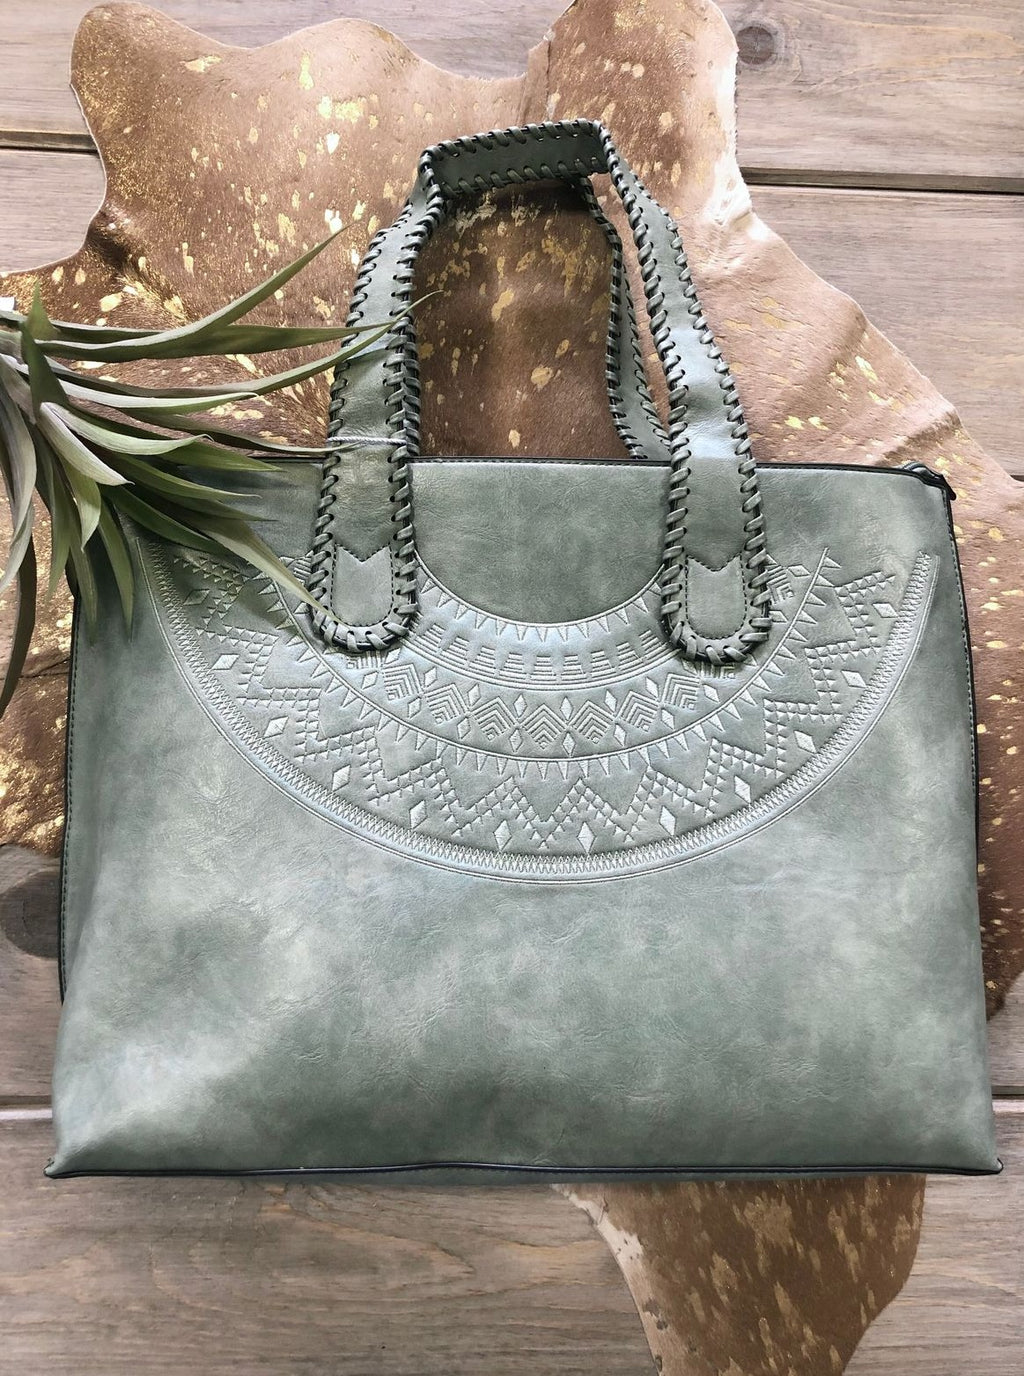 Vegan Leather Embroidered Tote with Braided Straps